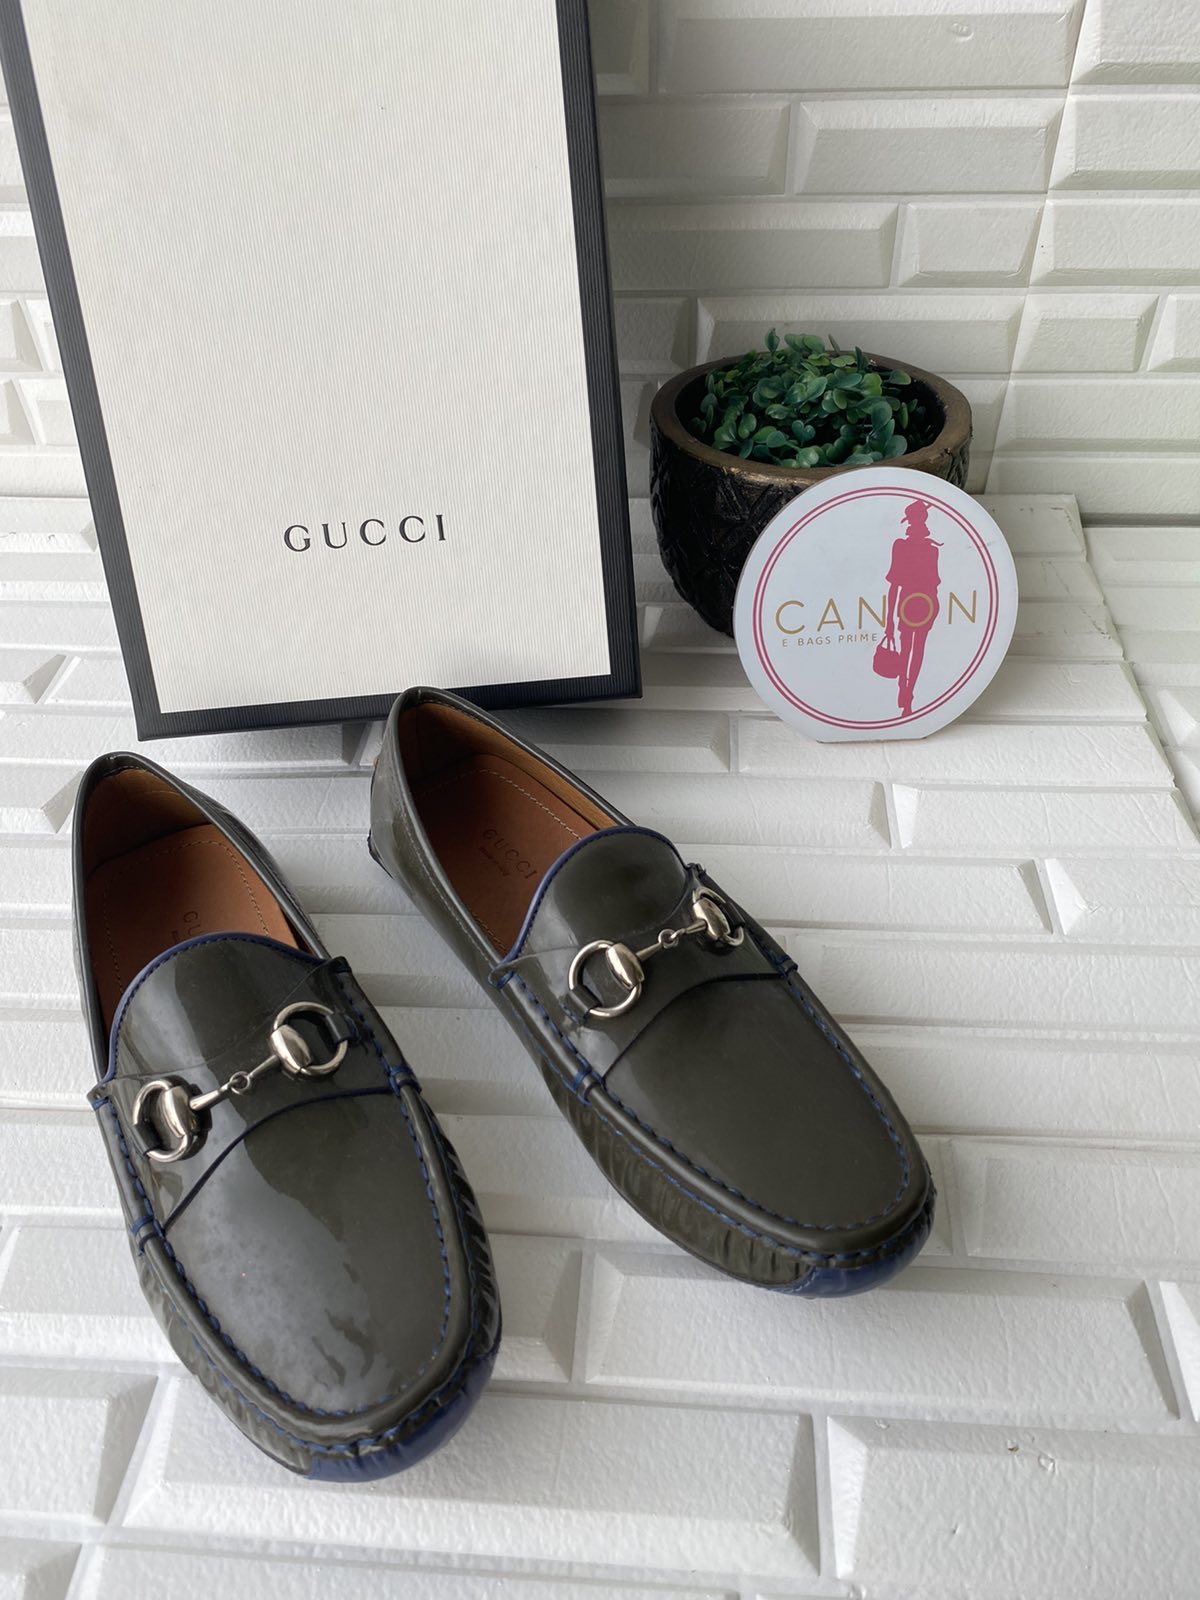 Gucci Loafers Patent Blue Size 37.5 Made in Italy. – Canon E-Bags Prime